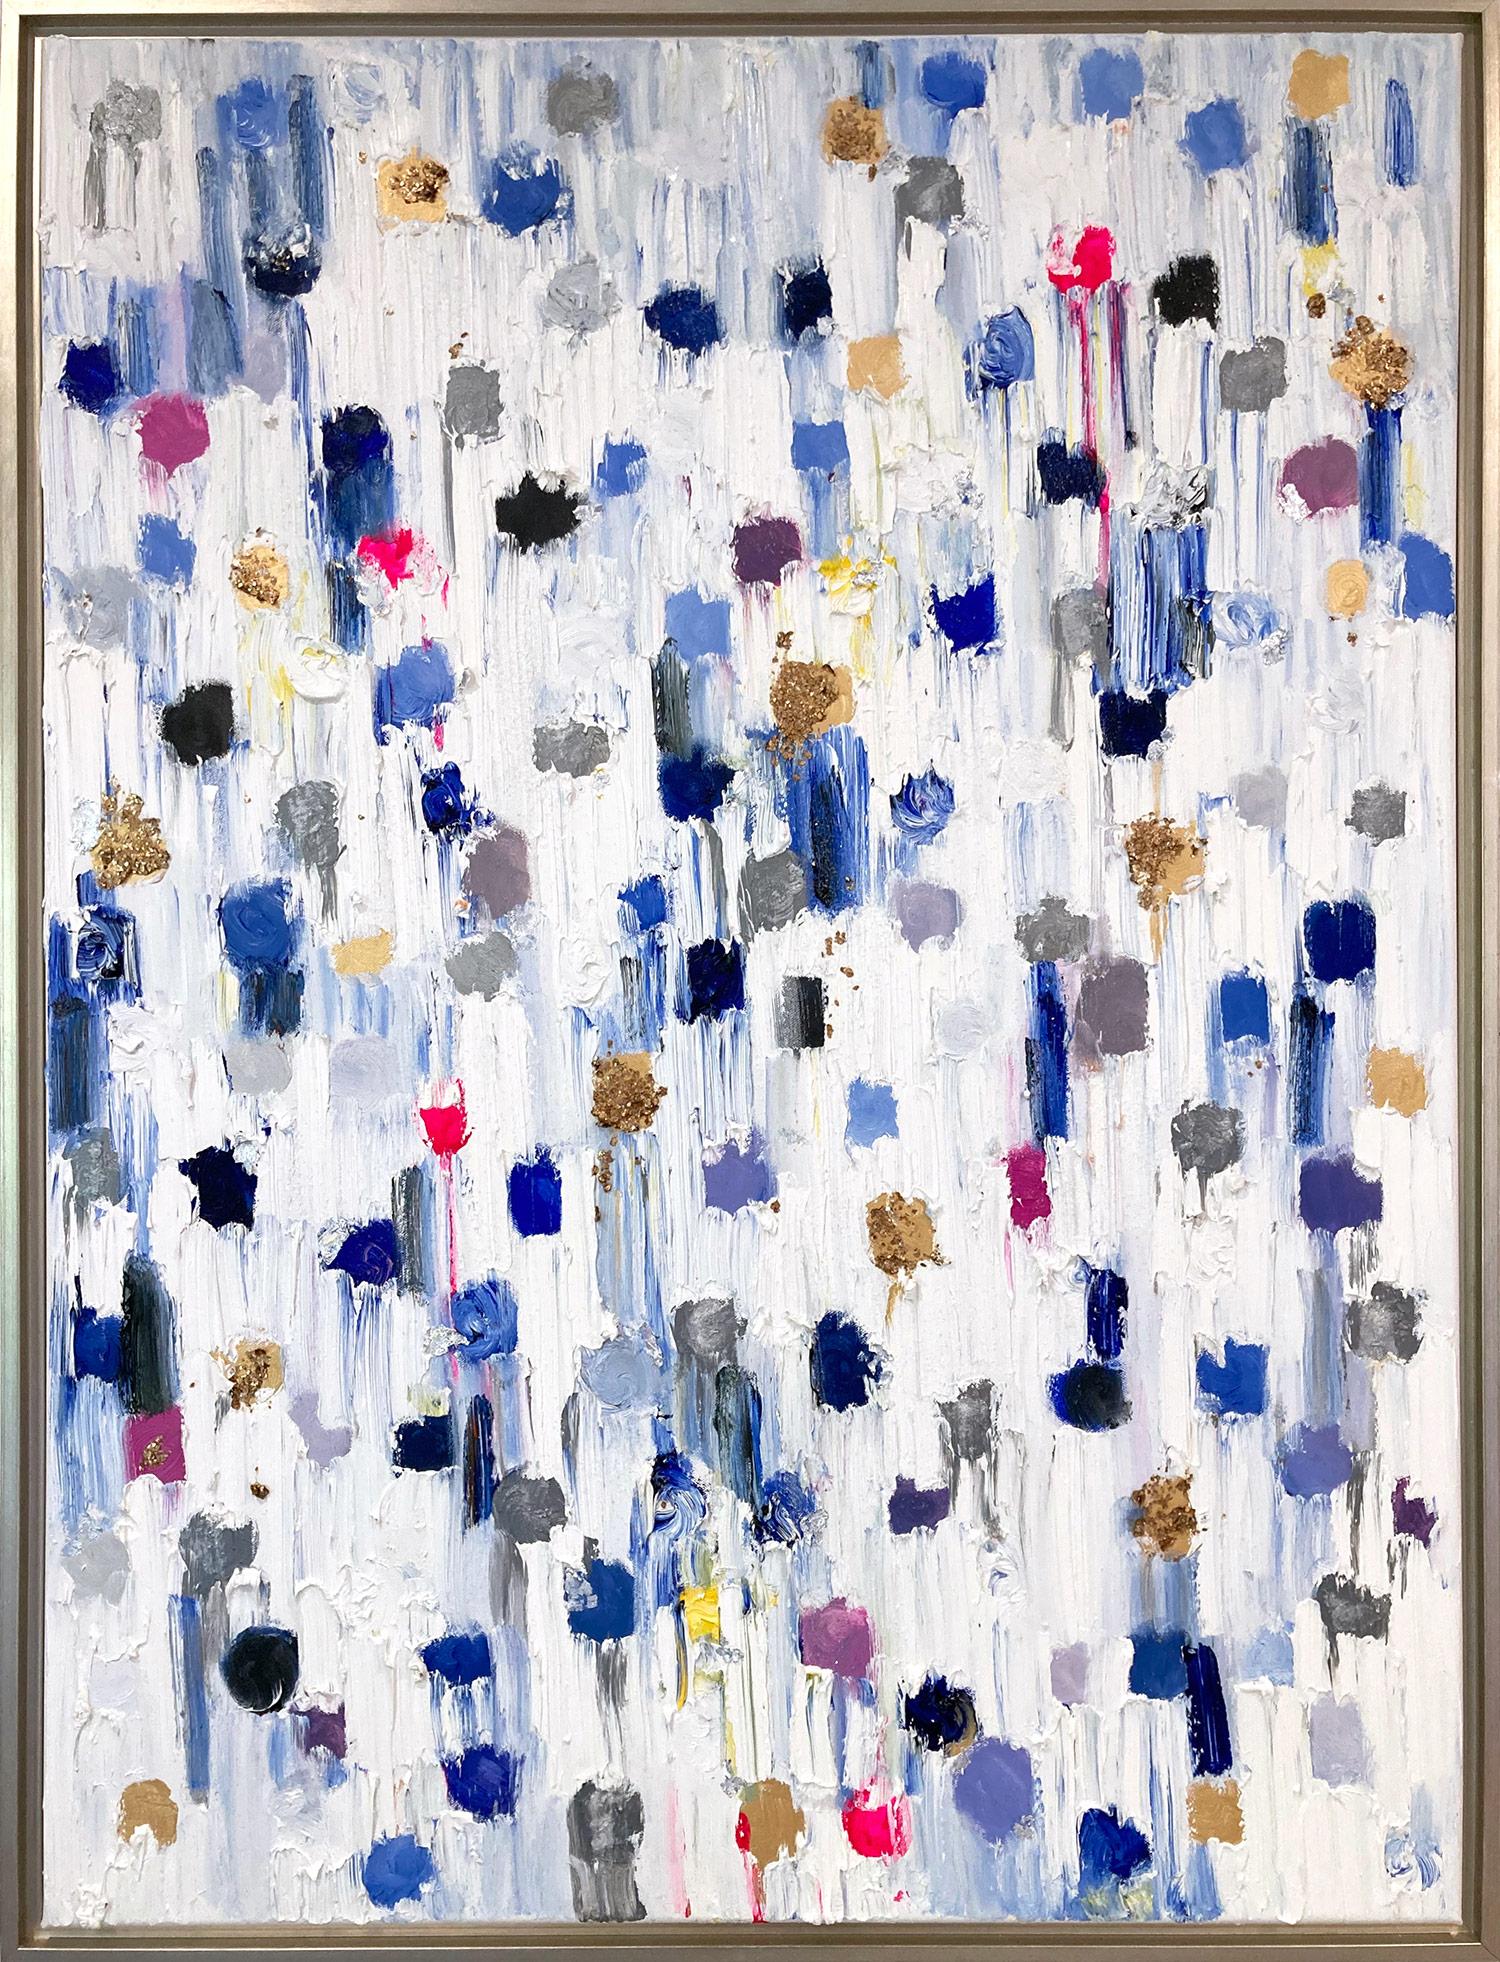 Cindy Shaoul Abstract Painting - "Dripping Dots - Montclair" Colorful Contemporary Oil Painting on Canvas Framed